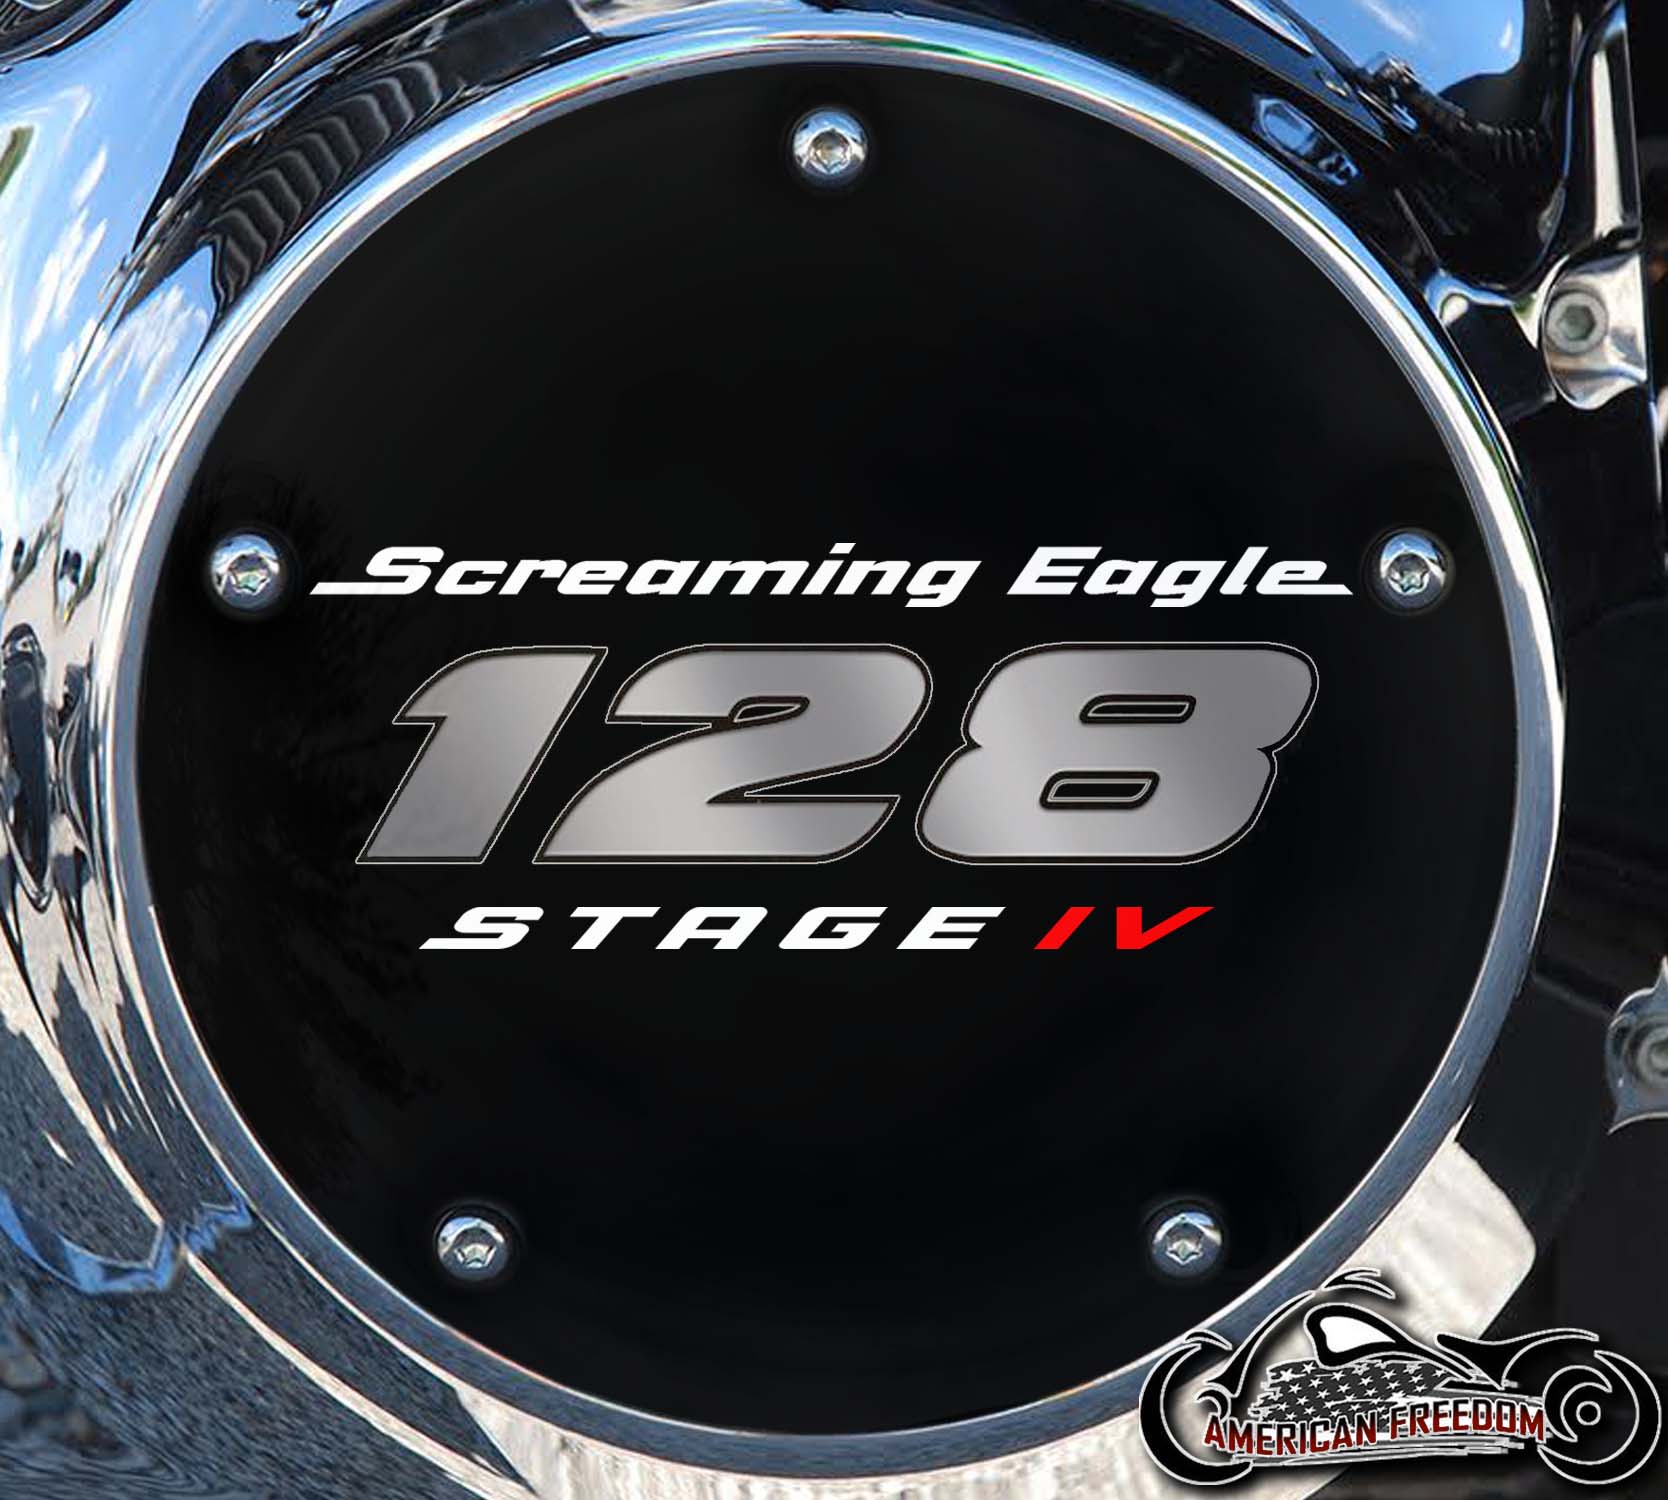 Screaming Eagle Stage IV 128 Derby Cover